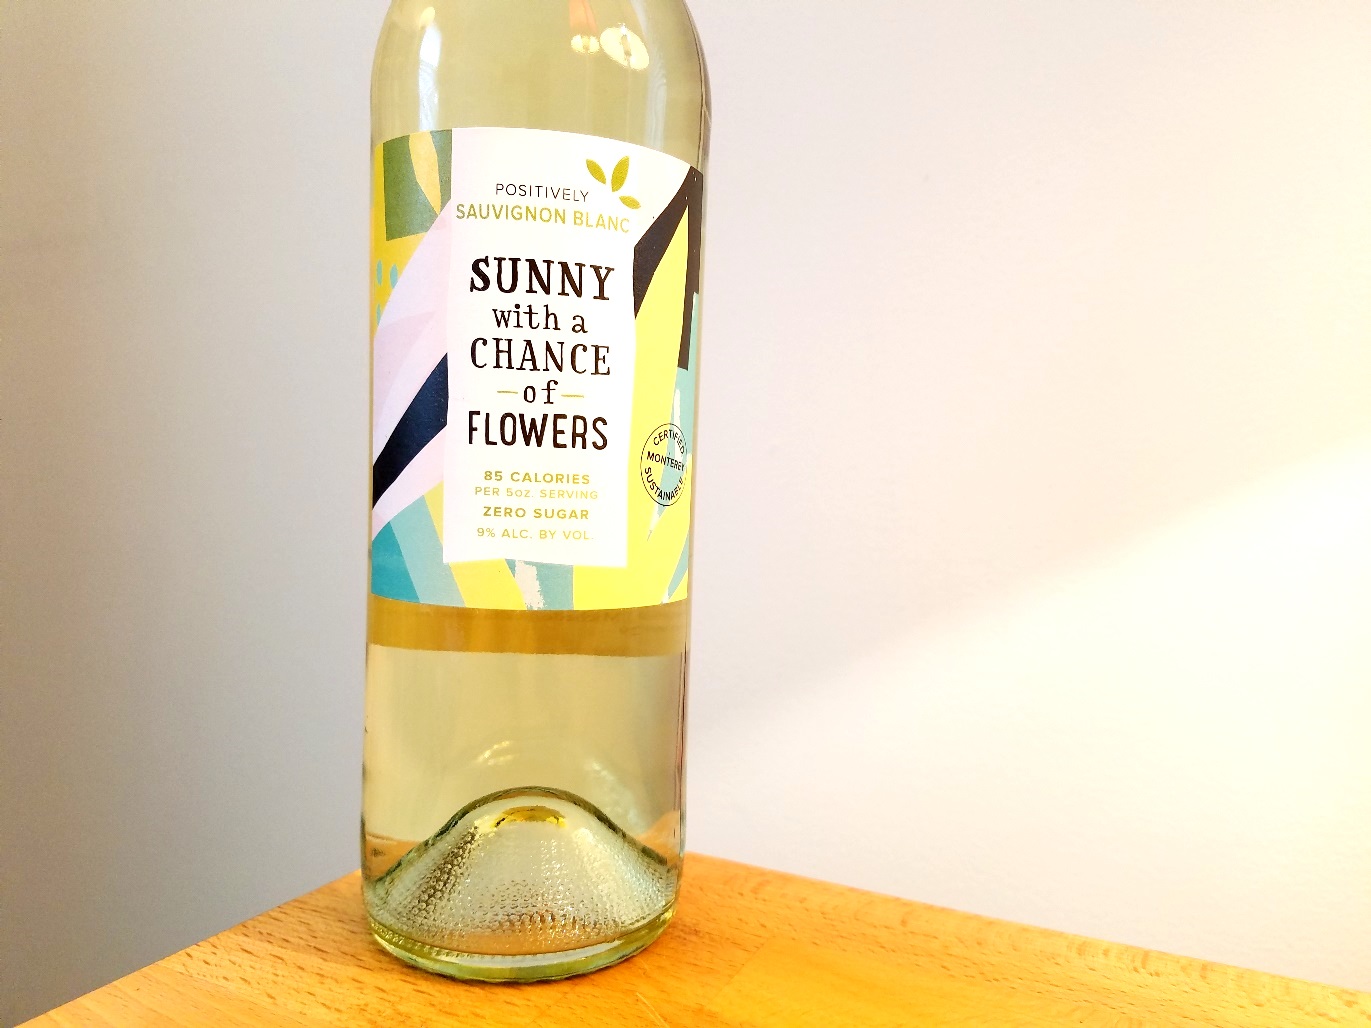 Sunny with a Chance of Flowers, Positively Sauvignon Blanc 2019, Monterrey, California, Wine Casual